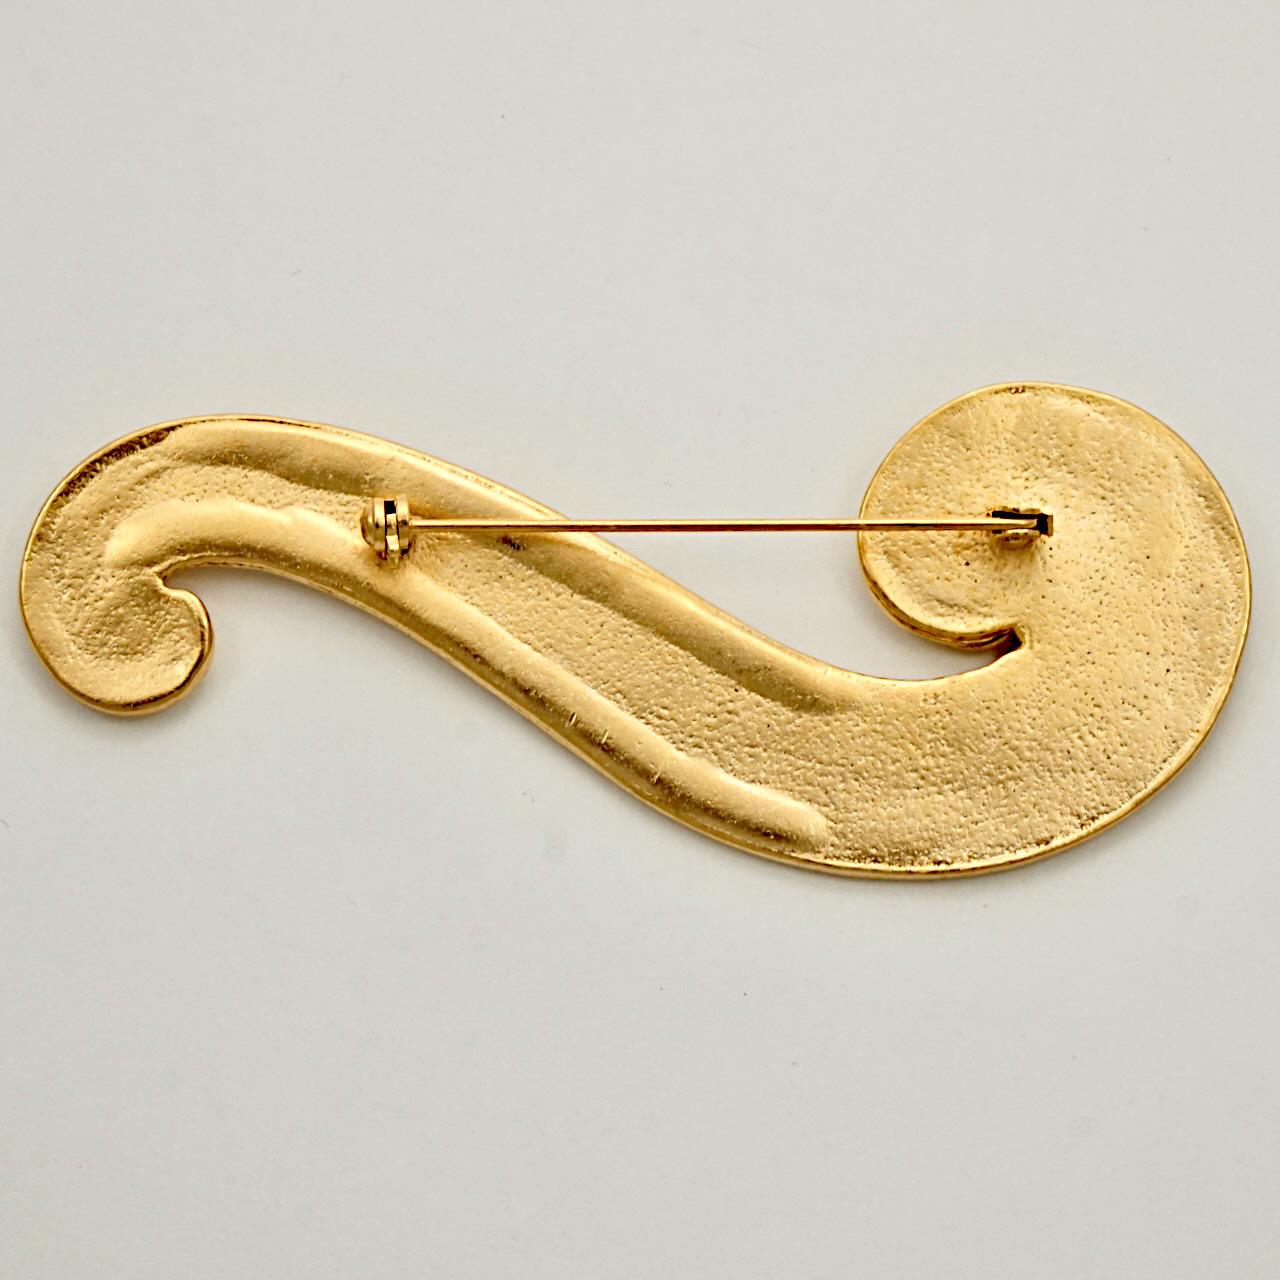 Wonderful gold plated abstract wave brooch, with a matt finish. Measuring length 9.05 cm / 3.5 inches by width 3.5 cm / 1.37 inches. The brooch is in very good condition.

This stylish statement brooch is circa 1980s.